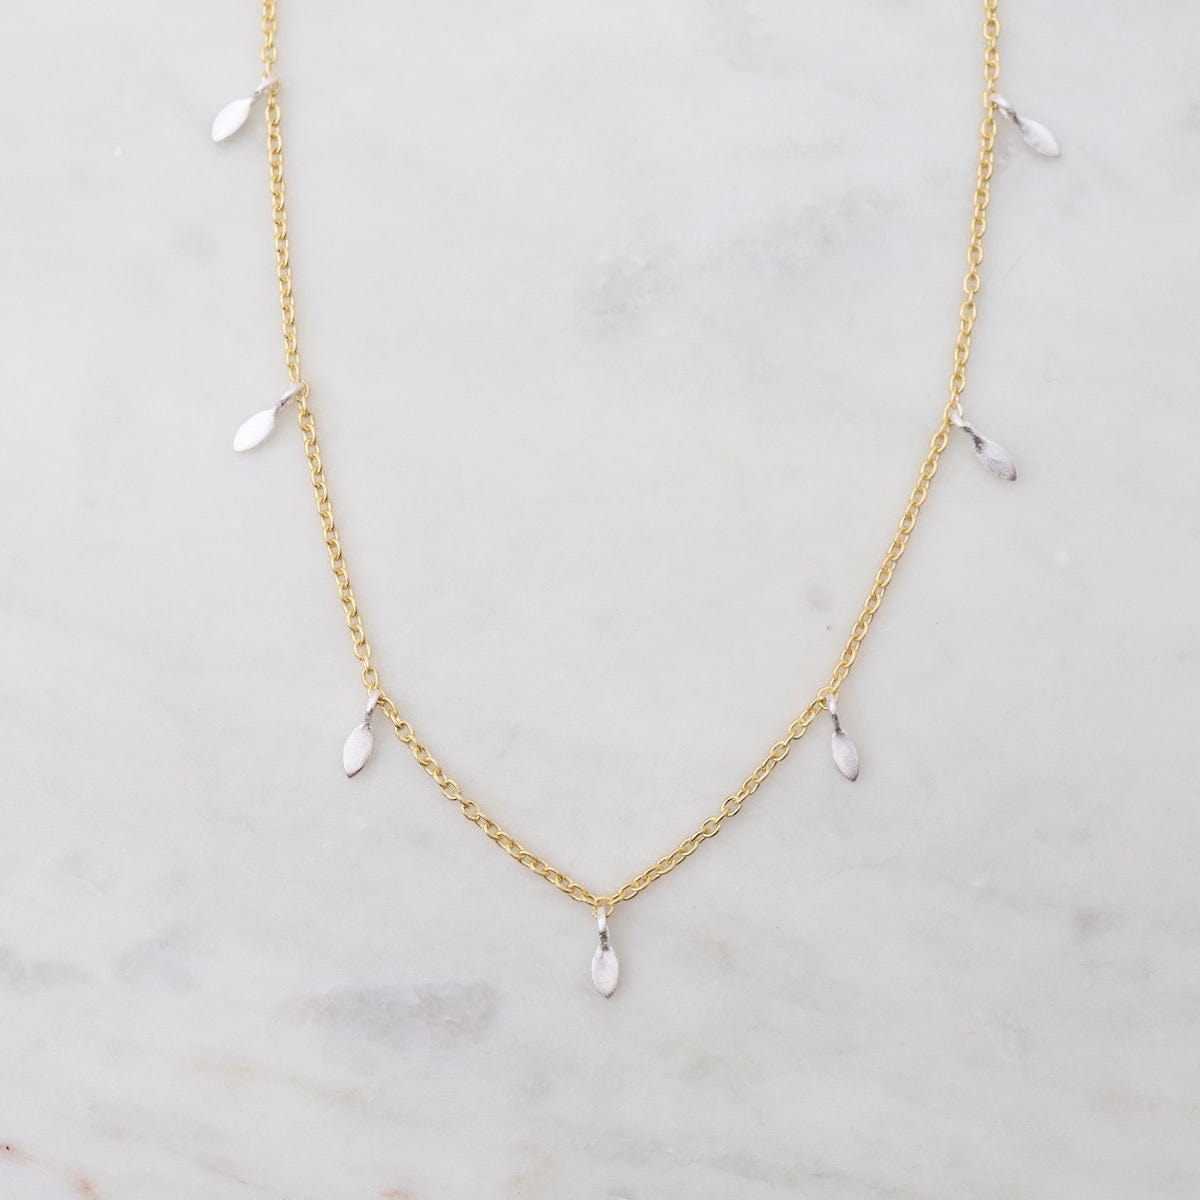 NKL-GPL Gold Chain with Silver Leaves Necklace